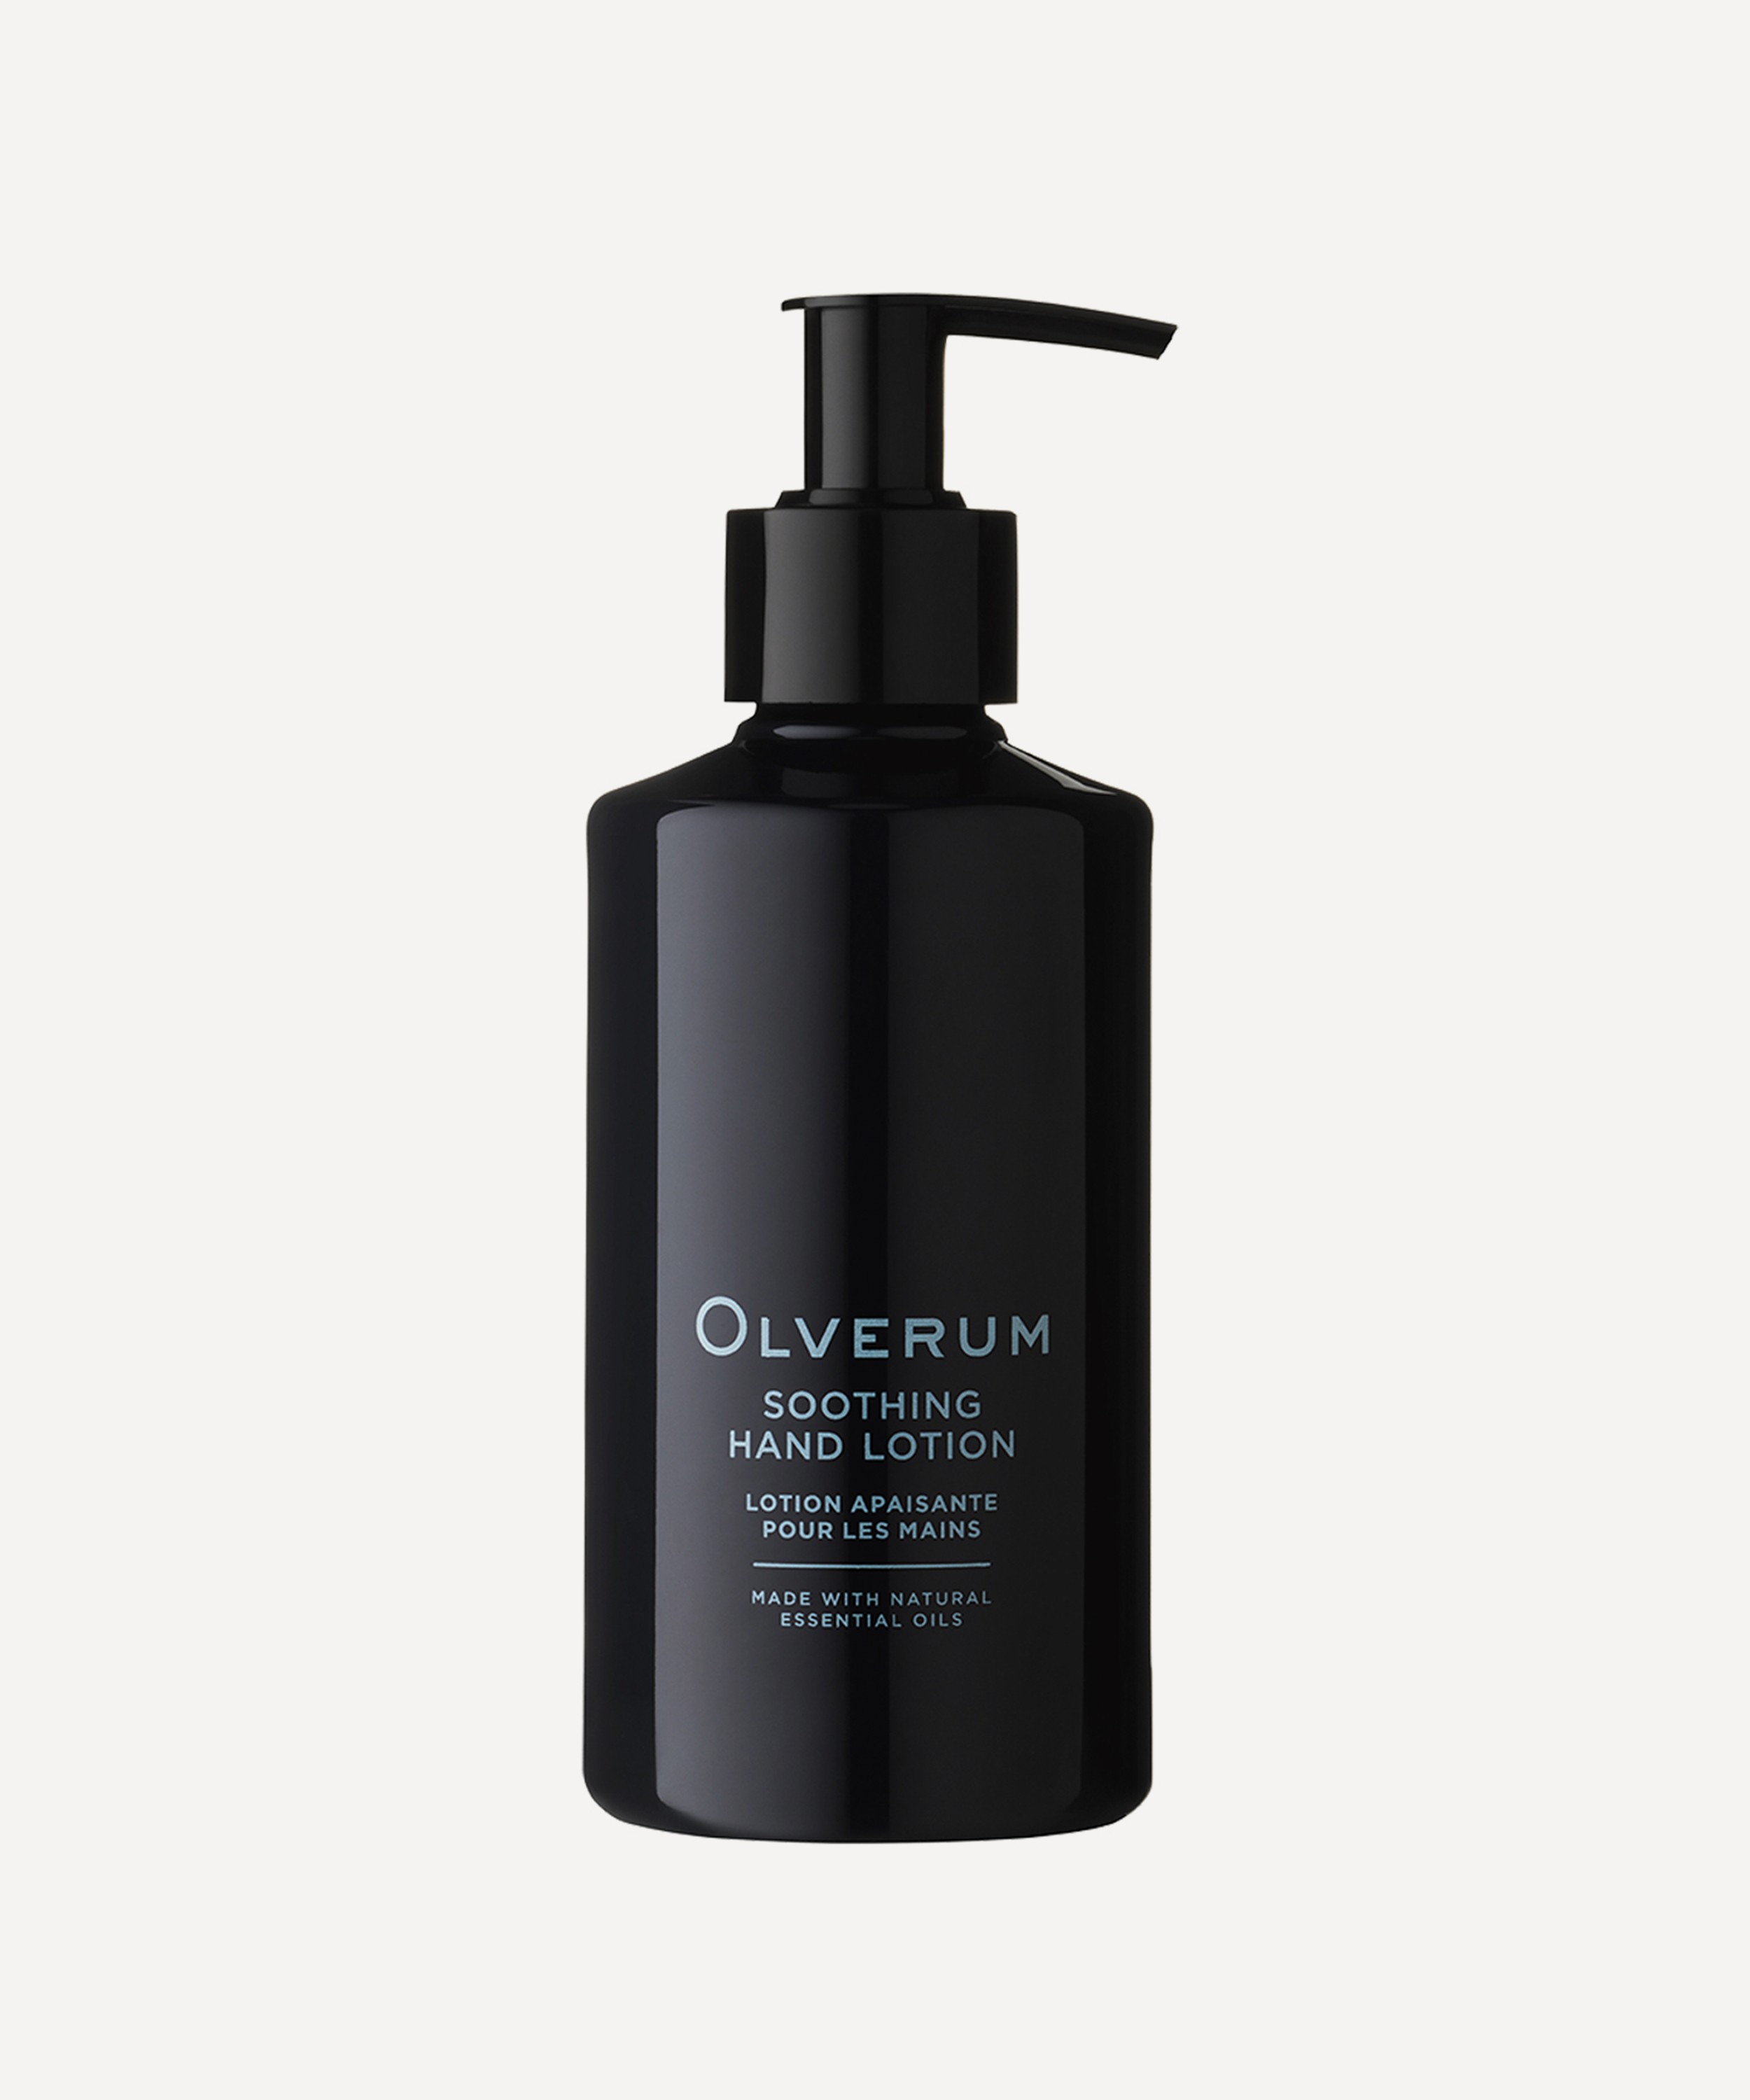 Olverum - Soothing Hand Lotion 250ml image number 0